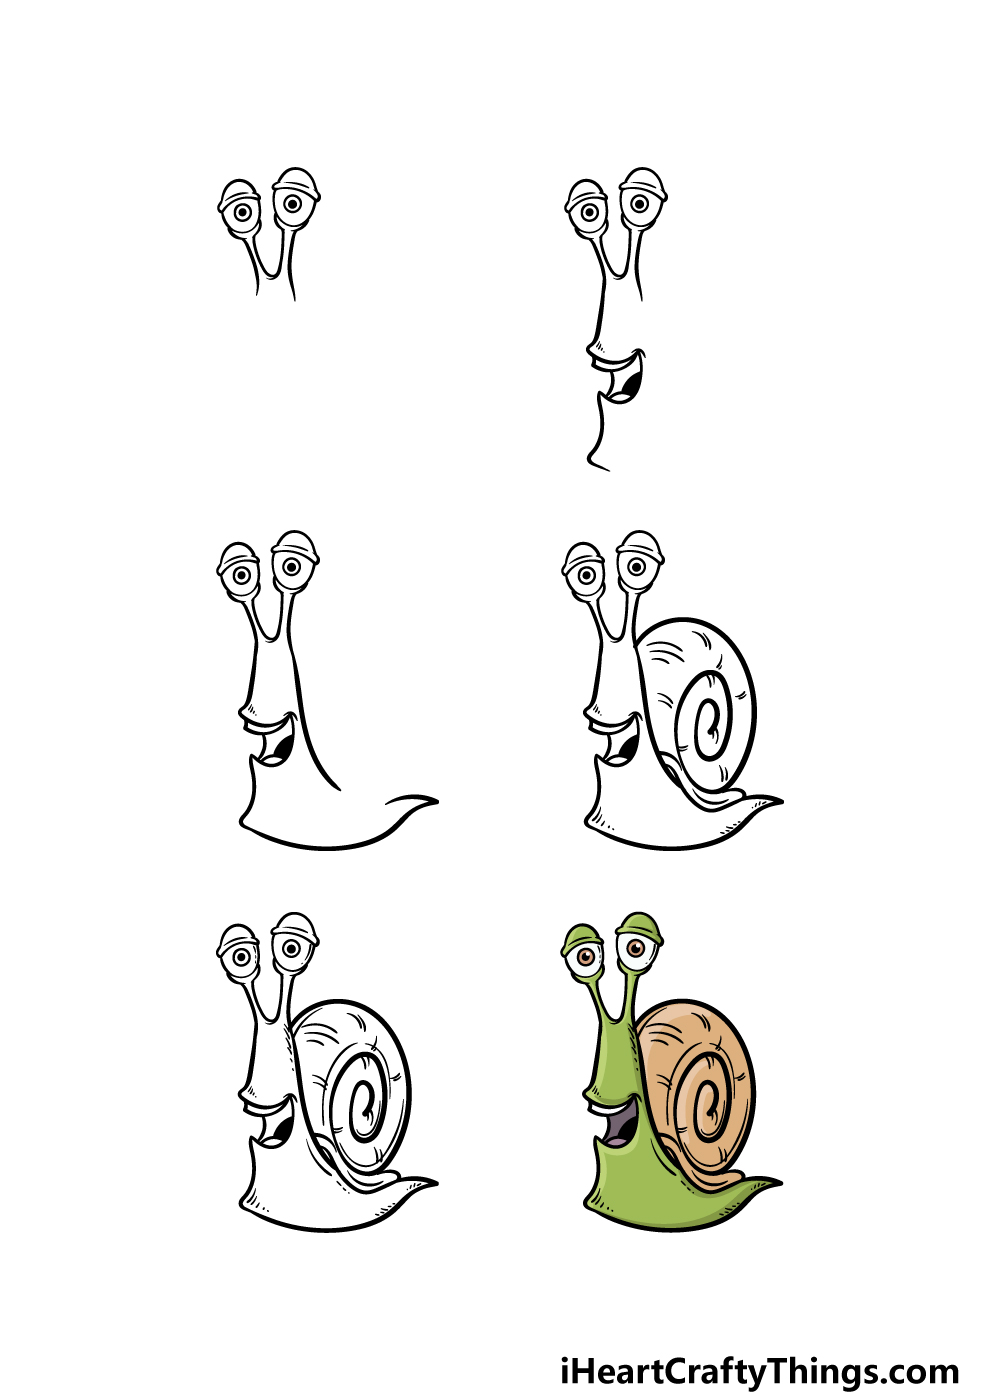 Cartoon Snail Drawing - How To Draw A Cartoon Snail Step By Step